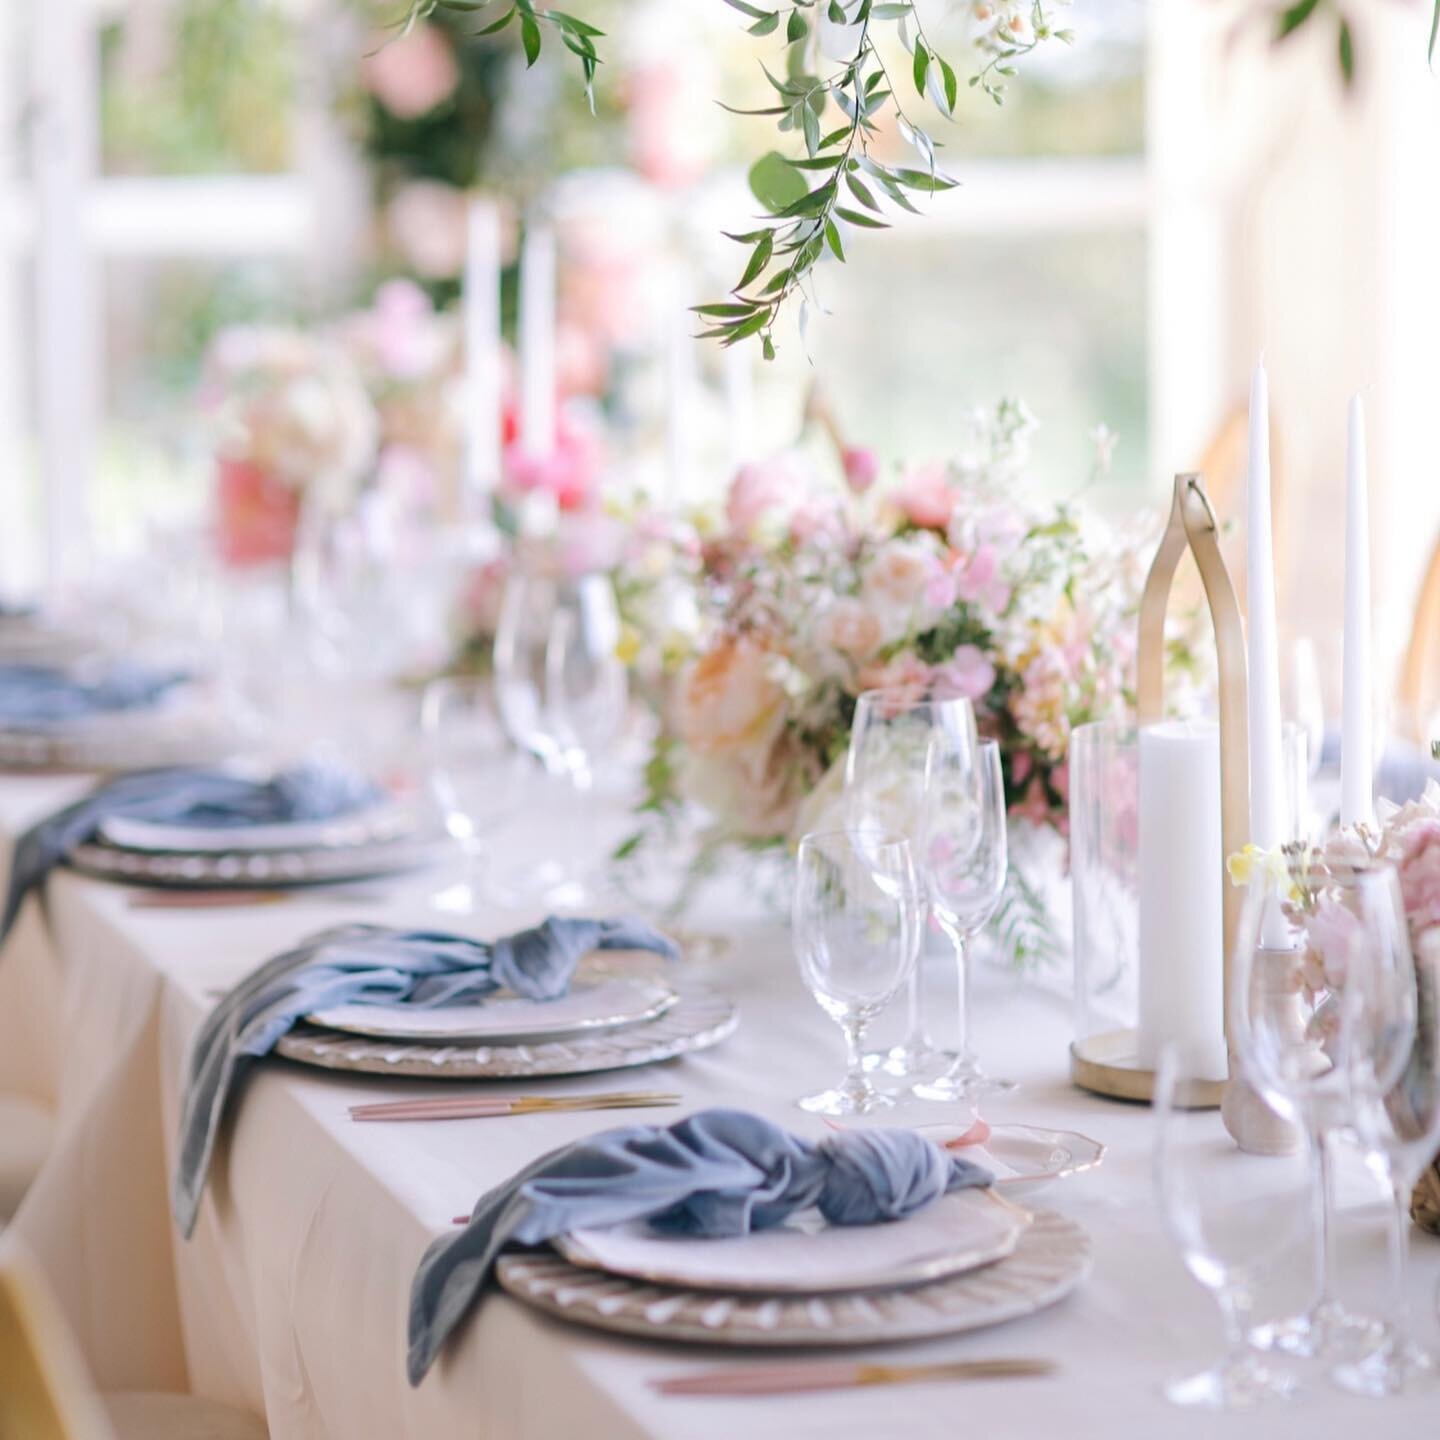 This was one of those times where the square crop just takes all the glory out of this shot. Do I select the gorgeous flatware and knot tied velvet napkins or the hanging baskets overhead pouring blooms down the table? 
Enter the two part post&hellip